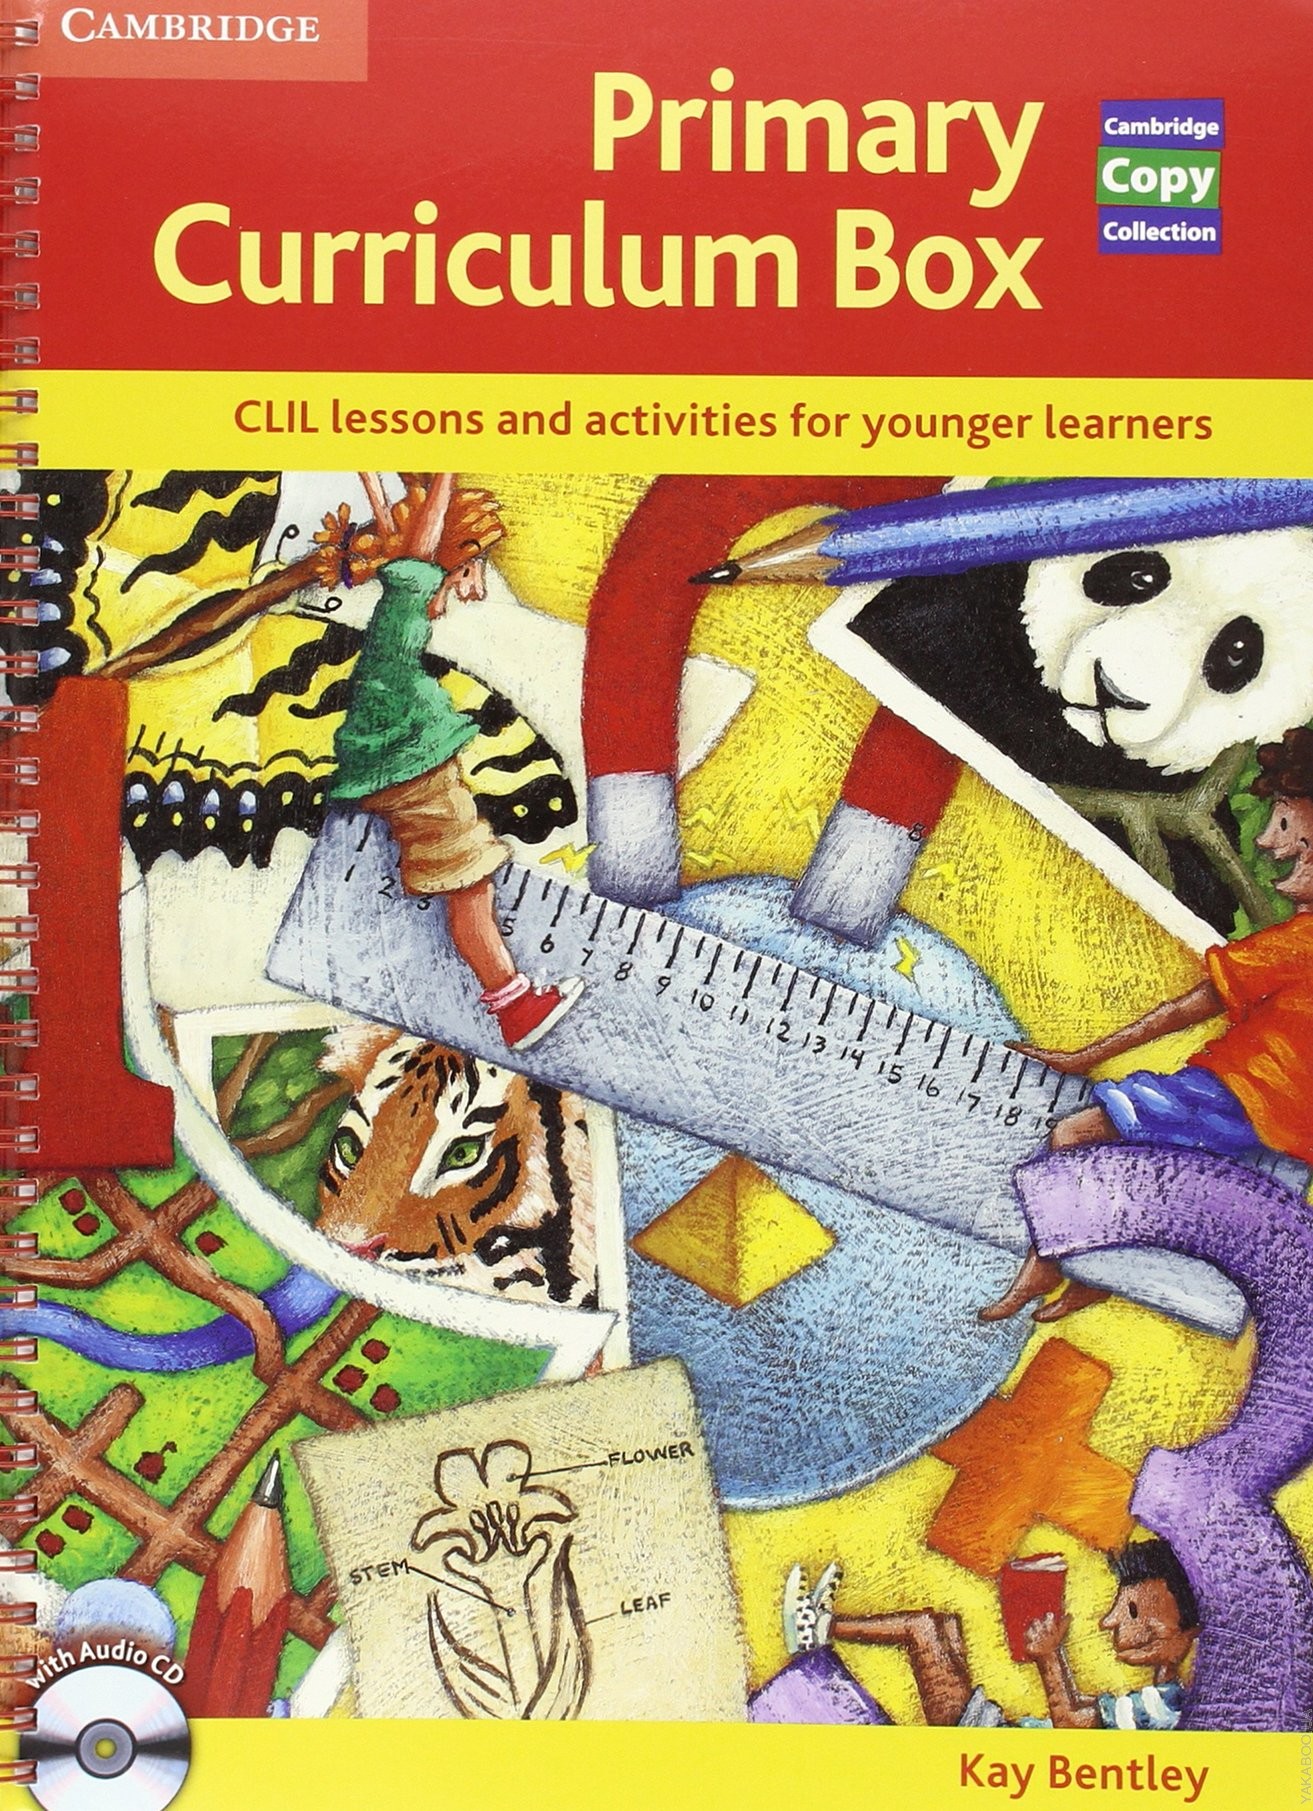 PRIMARY CURRICULUM BOX, CROSS-CURRICULAR TOPIC-BASED LESSONS FOR YOUNGER LEARNERS Book